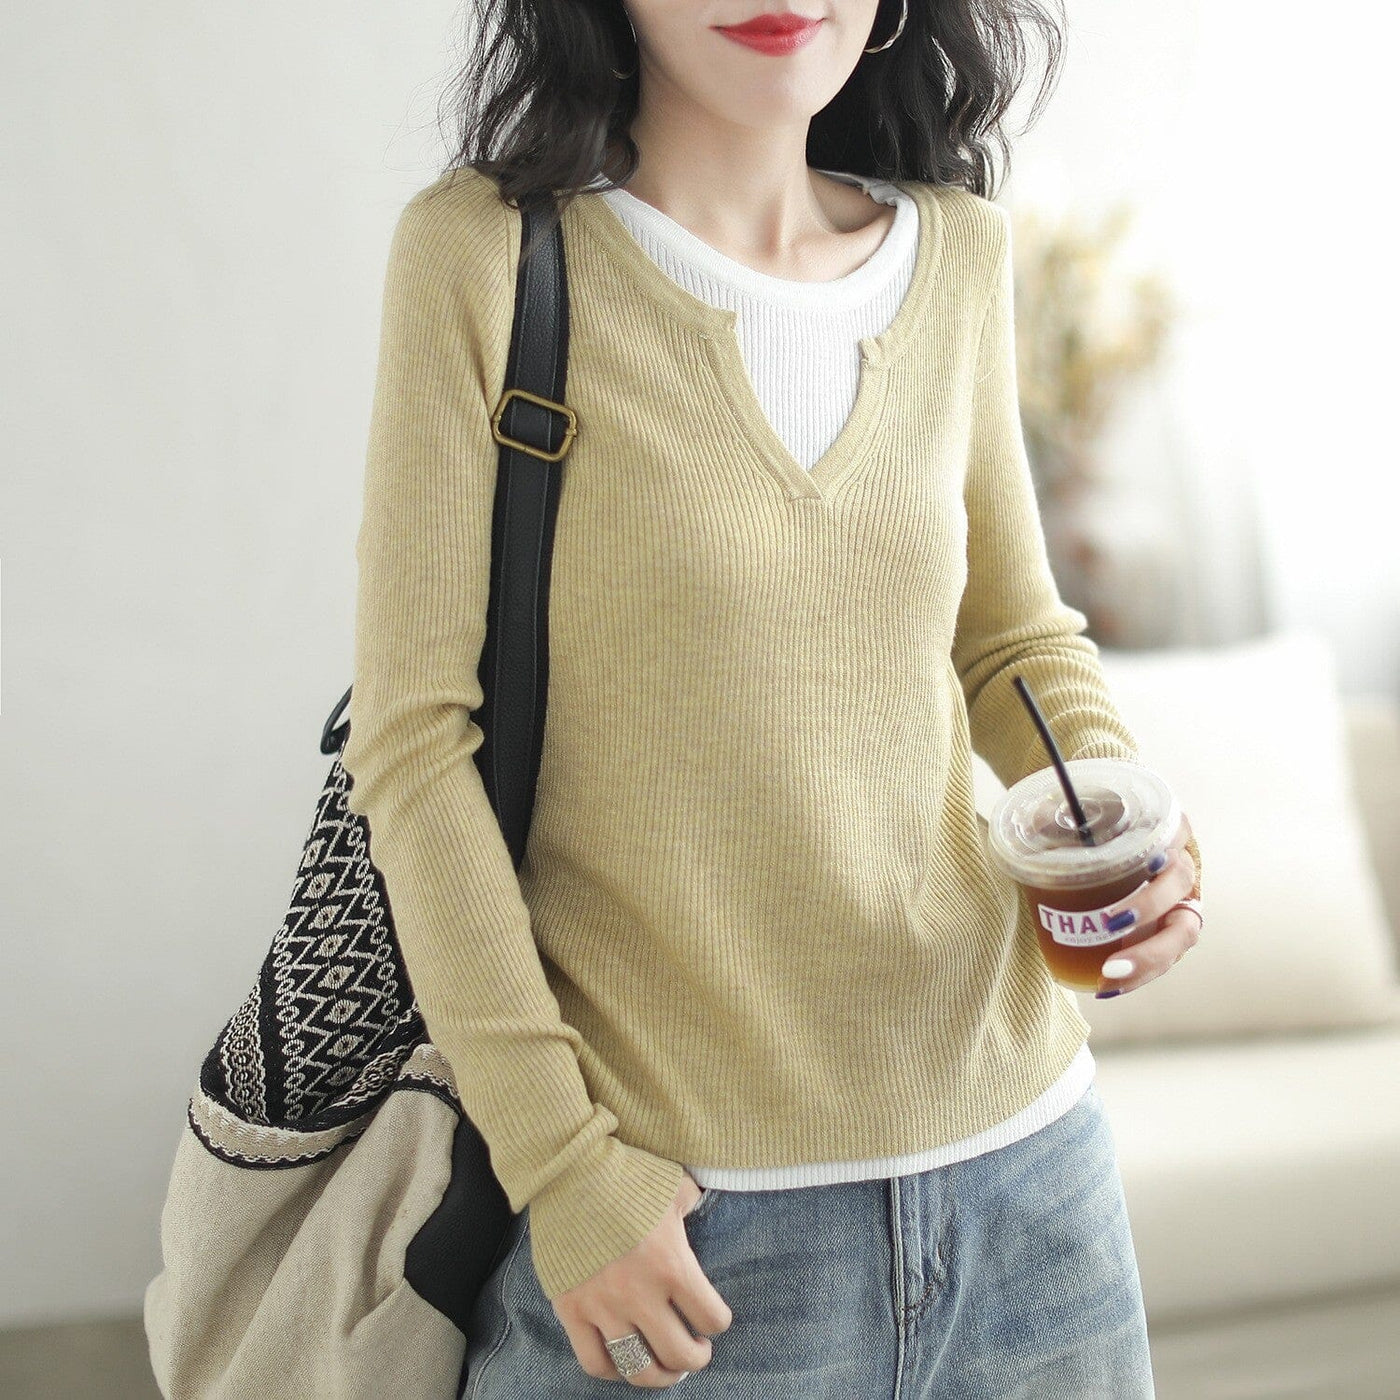 Women Casual Fashion Autumn Knitted Sweater